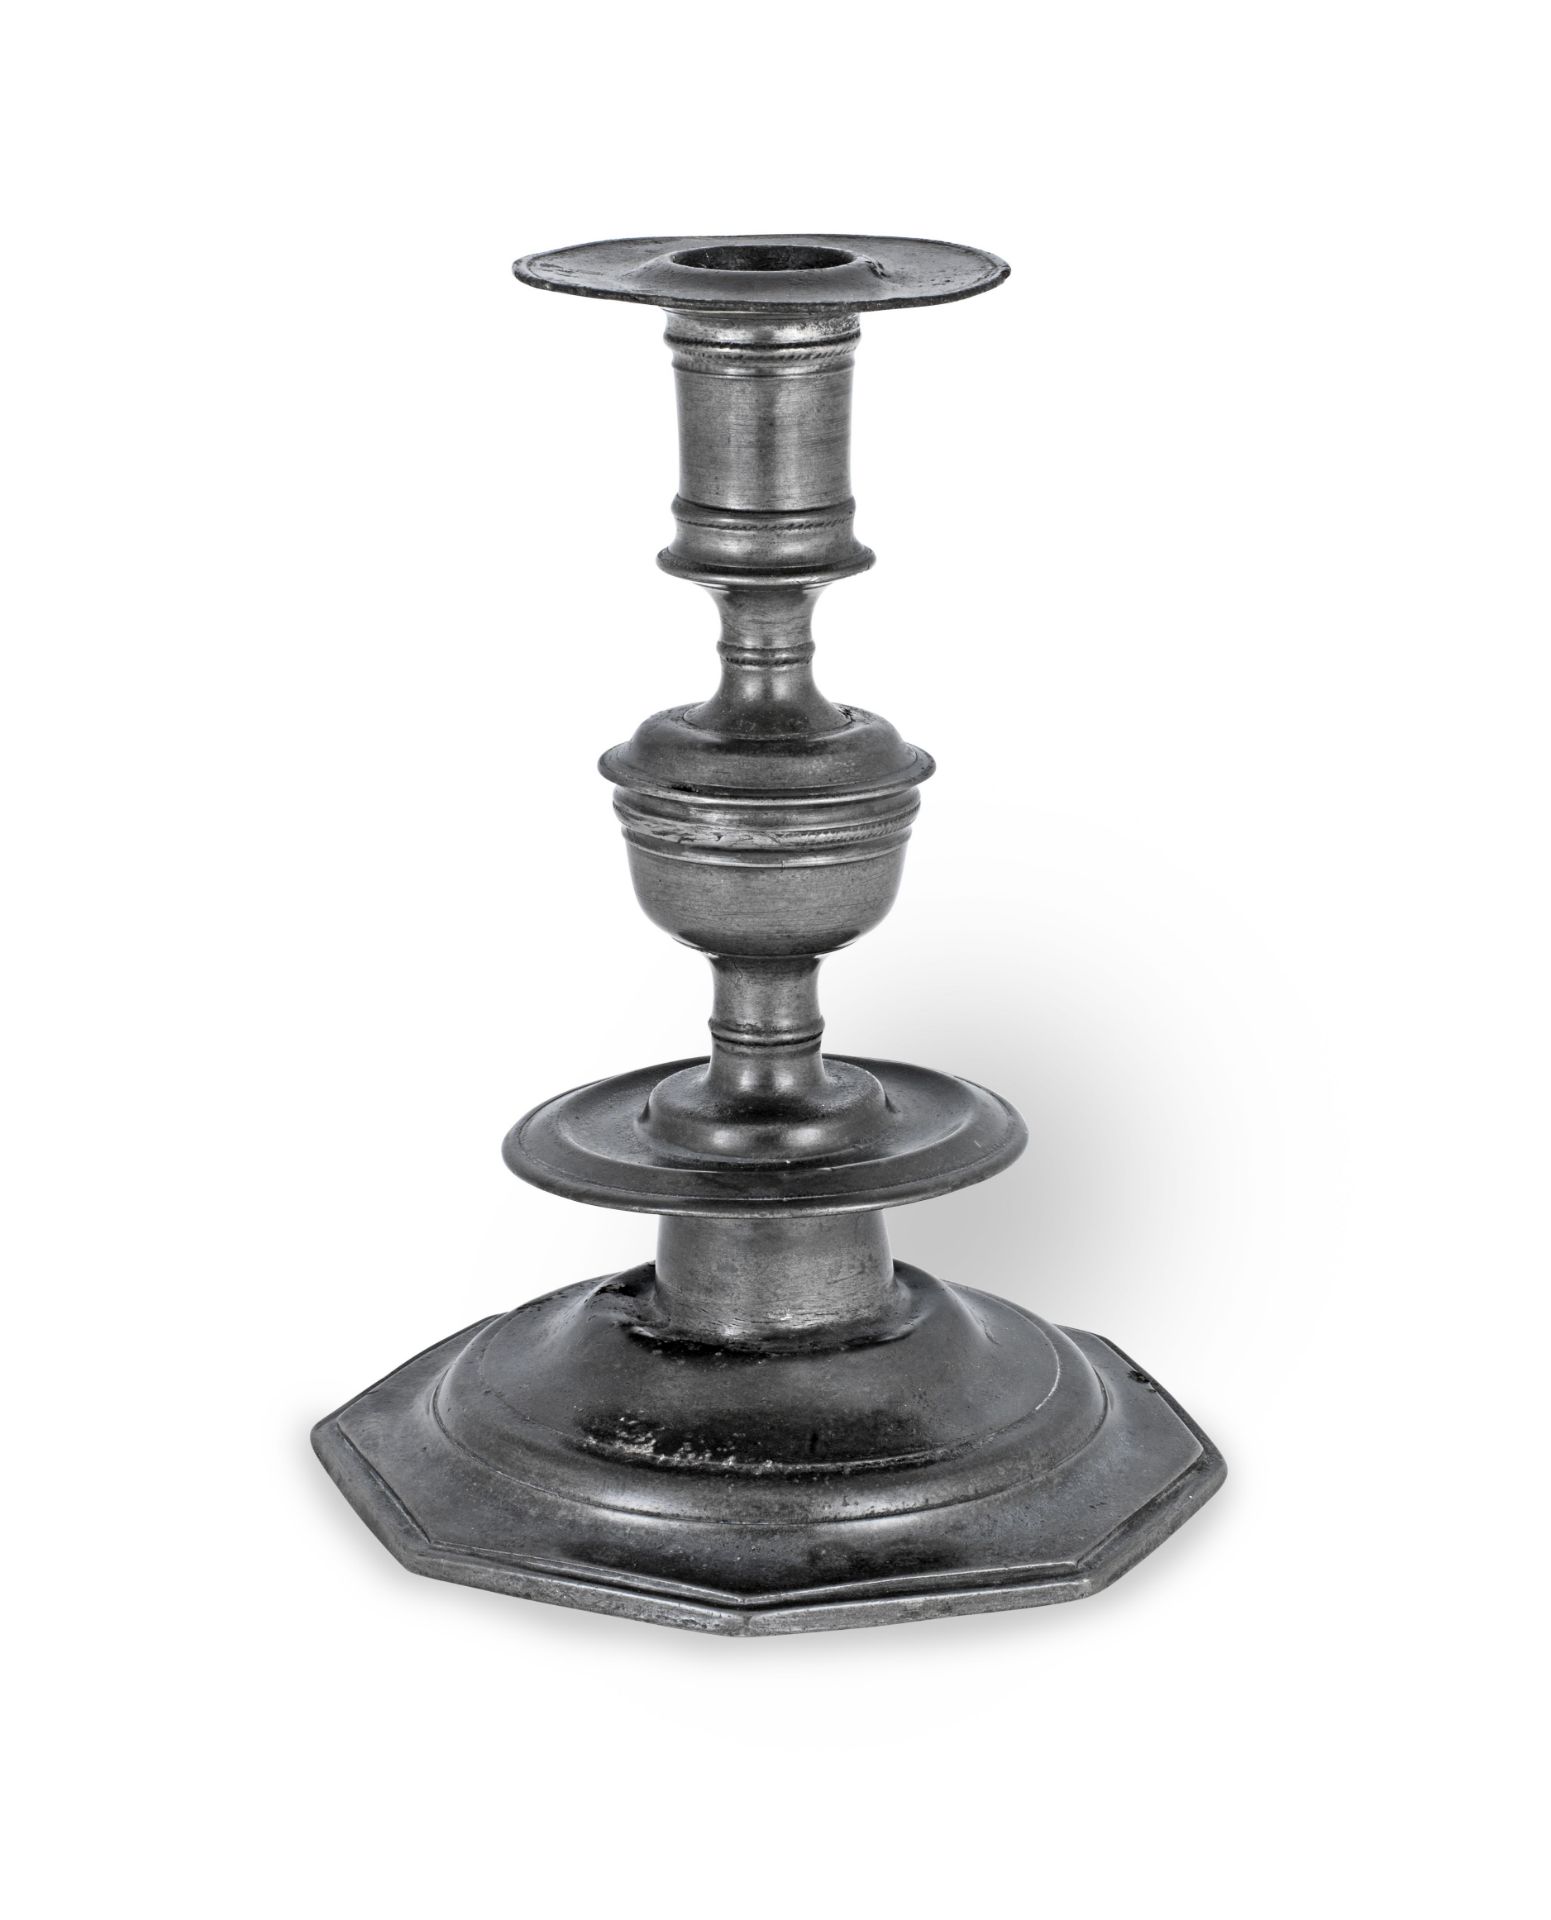 A rare Charles II pewter candlestick, circa 1675